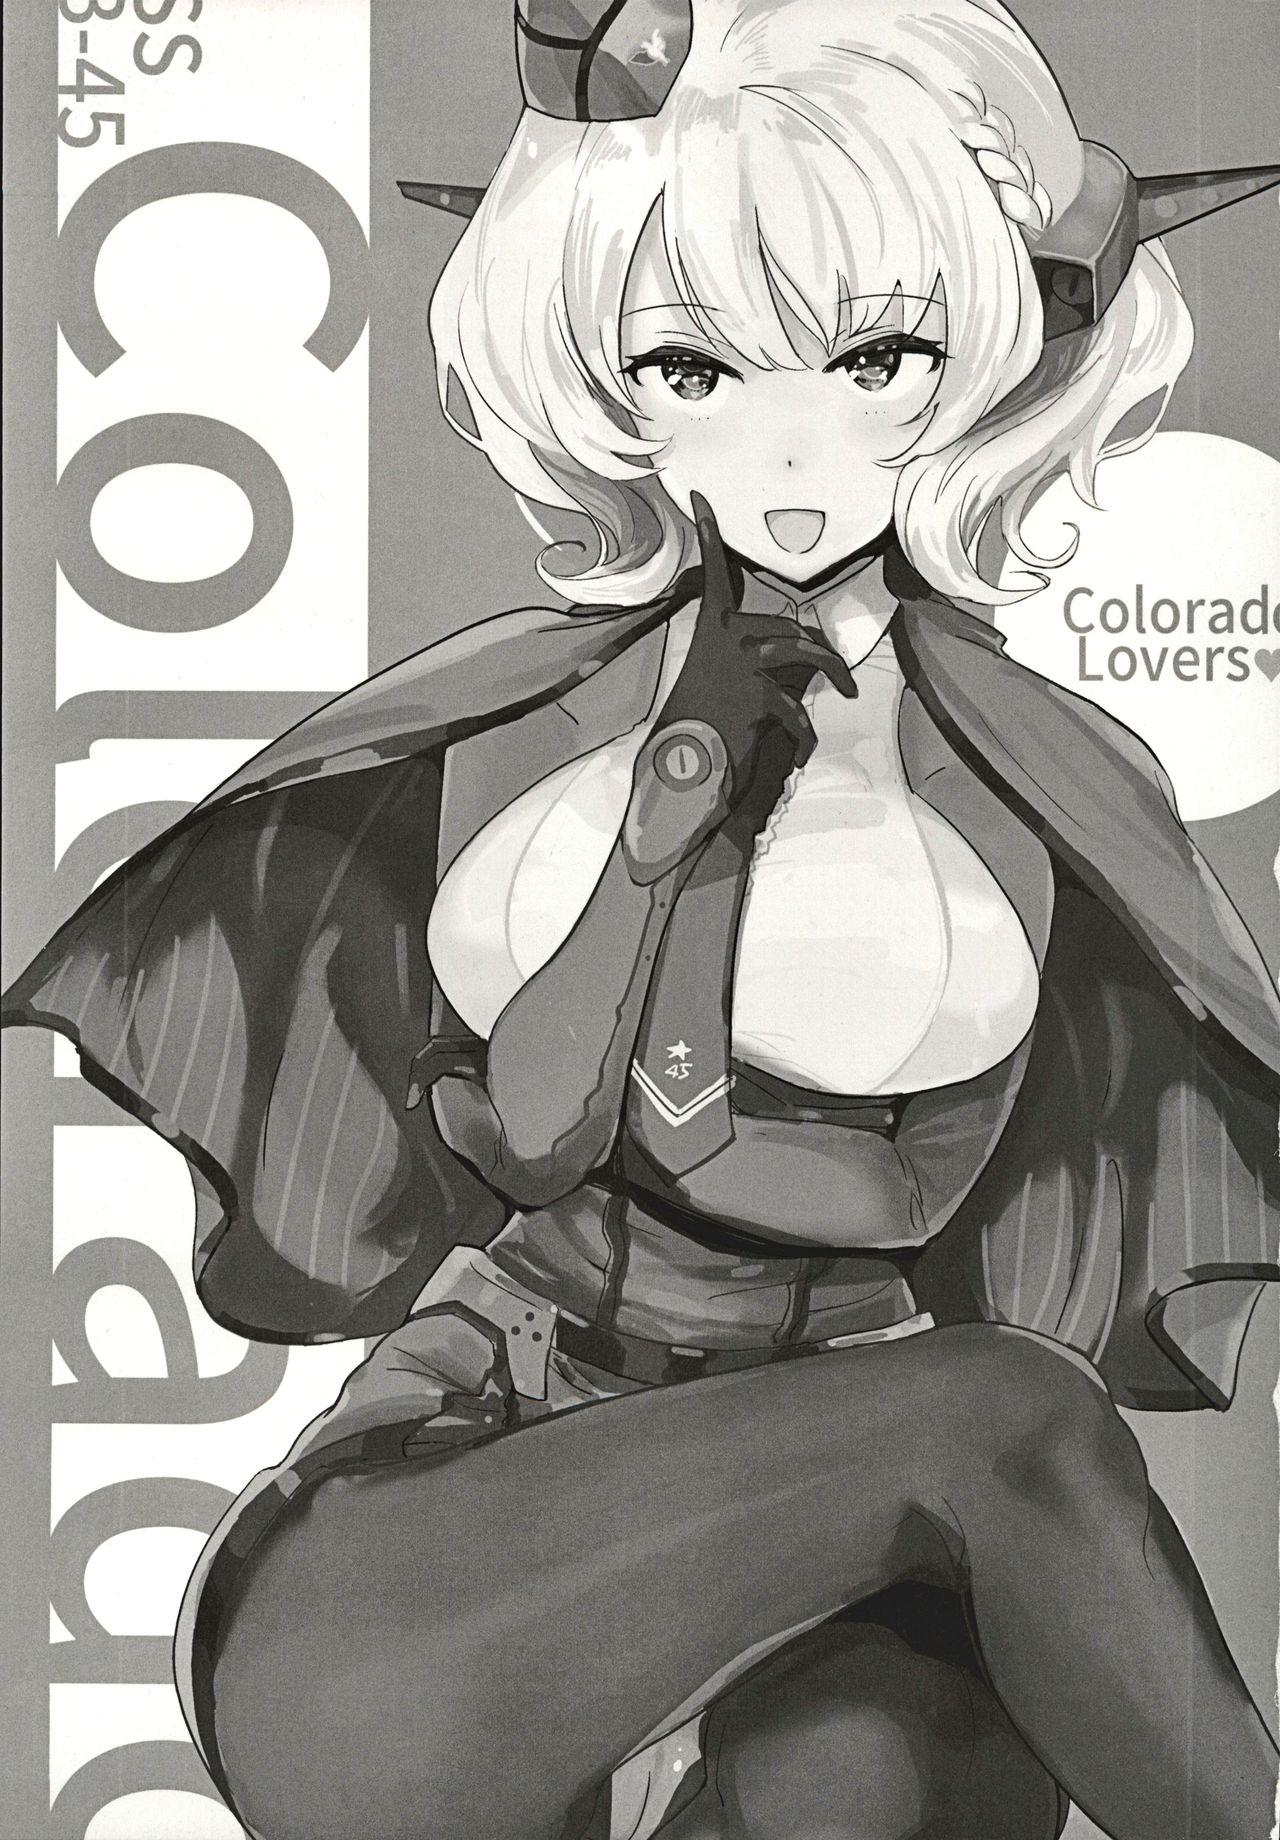 Stepsiblings Colorado Lovers - Kantai collection Gym - Page 3